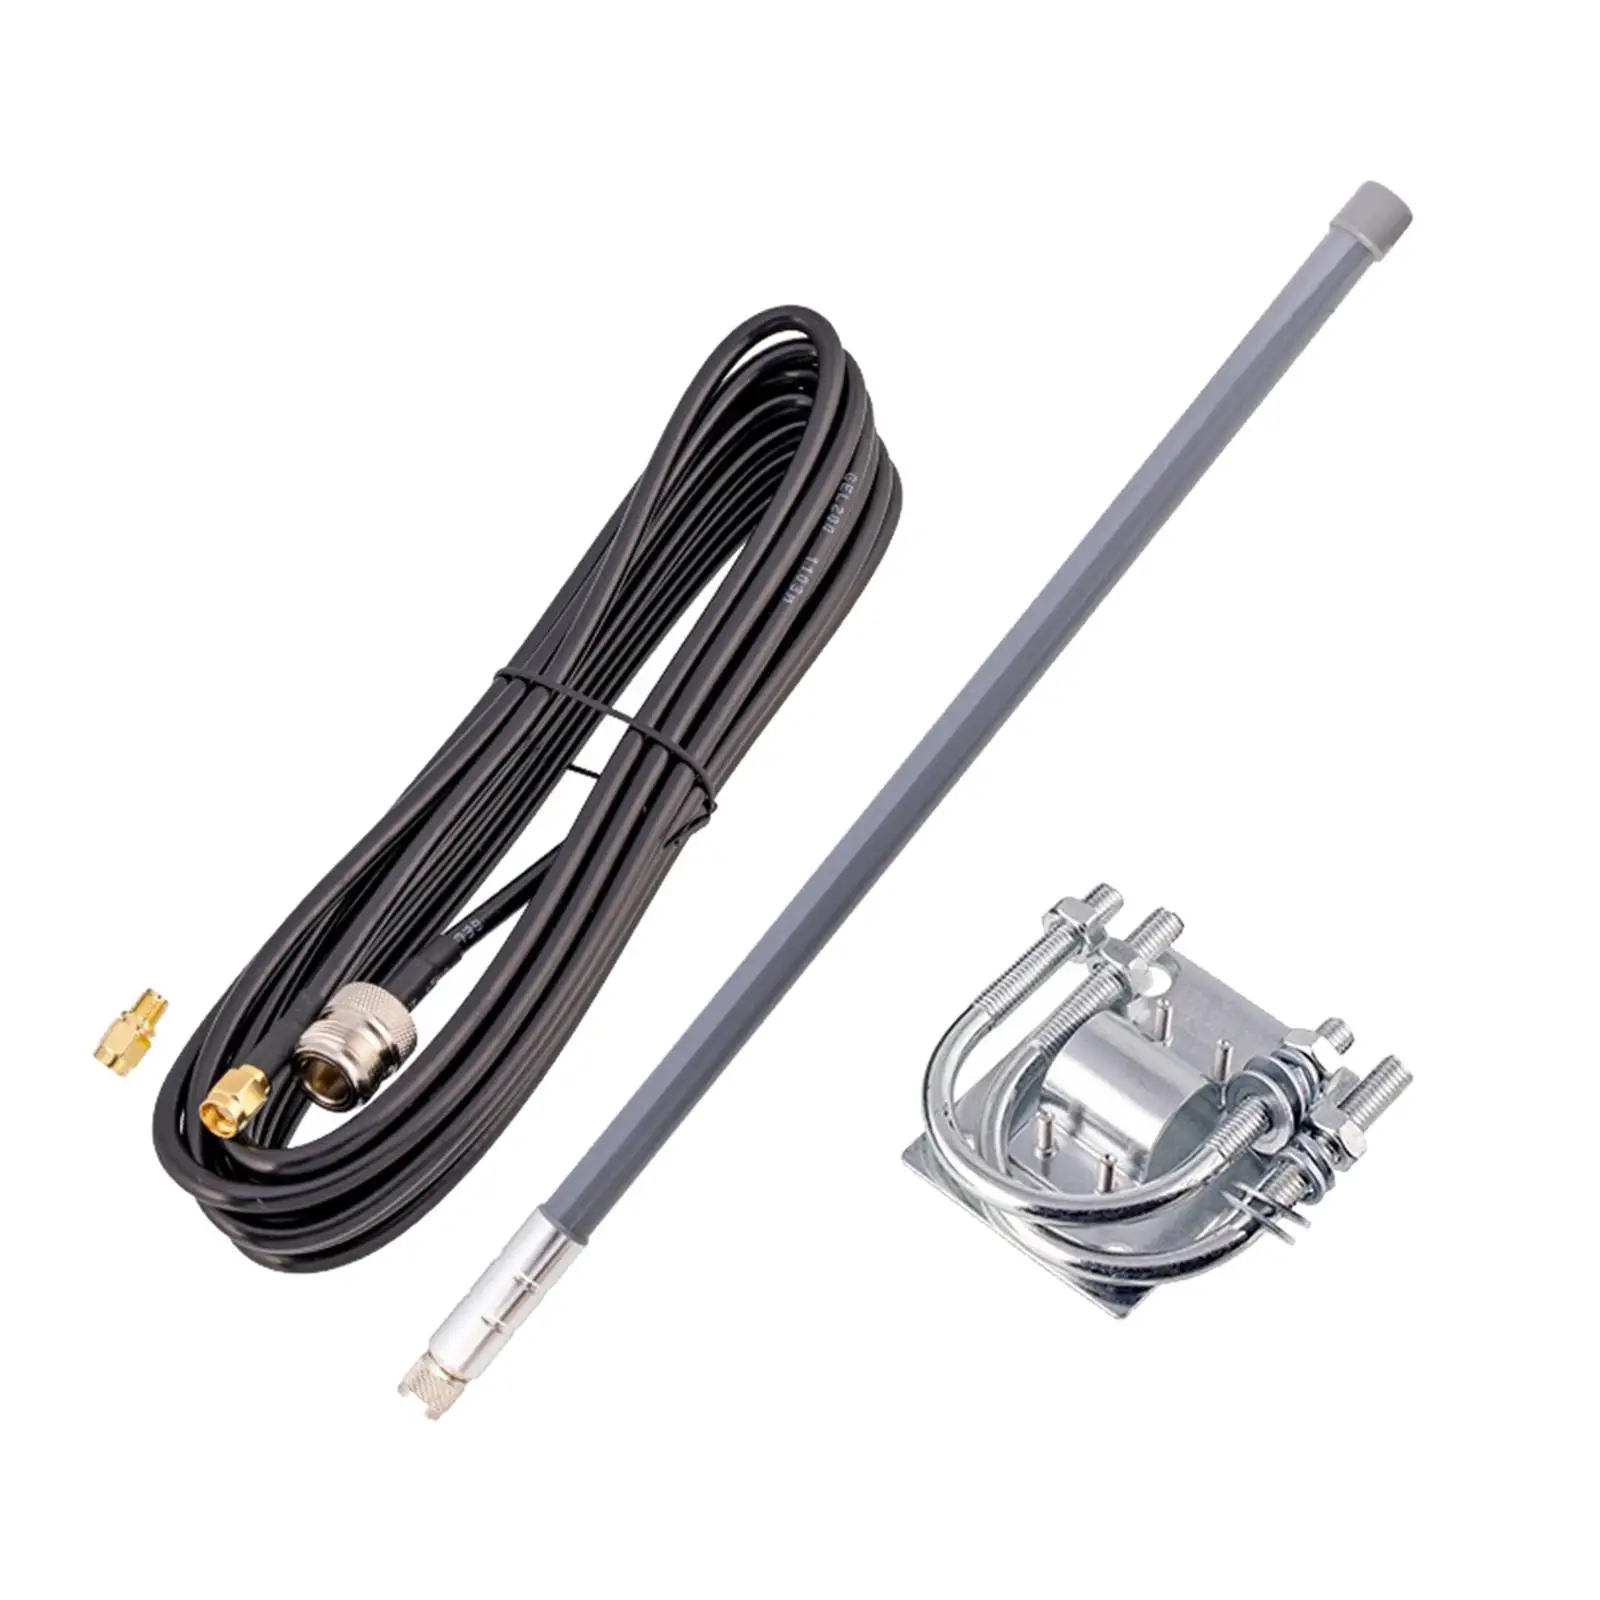 Waterproof Fiberglass Antenna RG58 Female-To-Rp-Sma 860-930MHz for City Monitoring Outdoor Environmental Monitoring